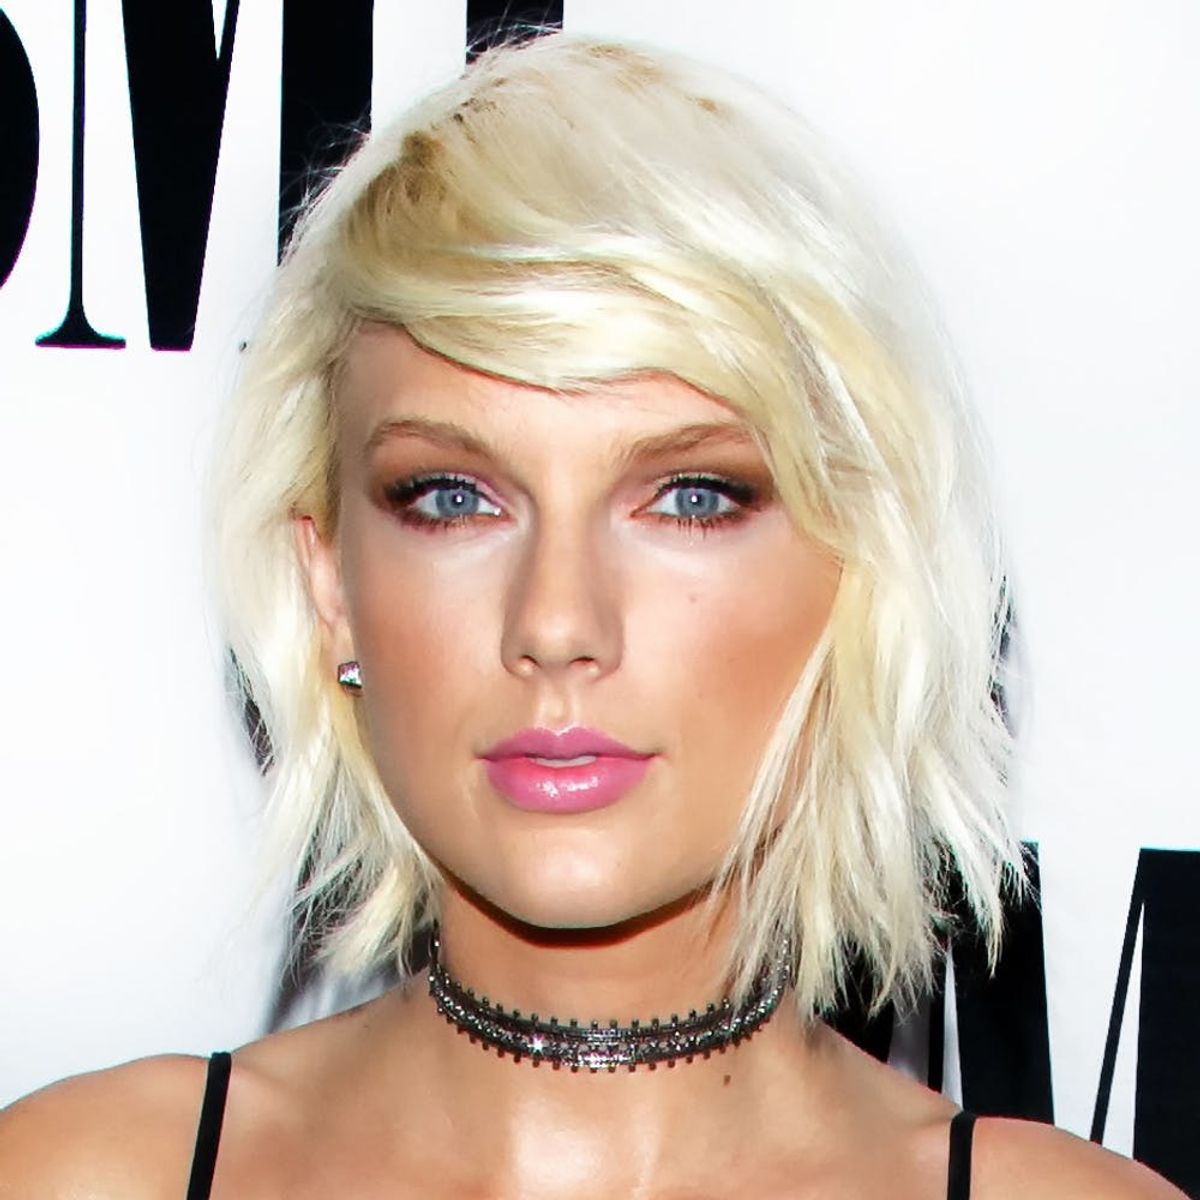 6 of Taylor Swift’s Most Memorable Breakups (and the Songs They Inspired)